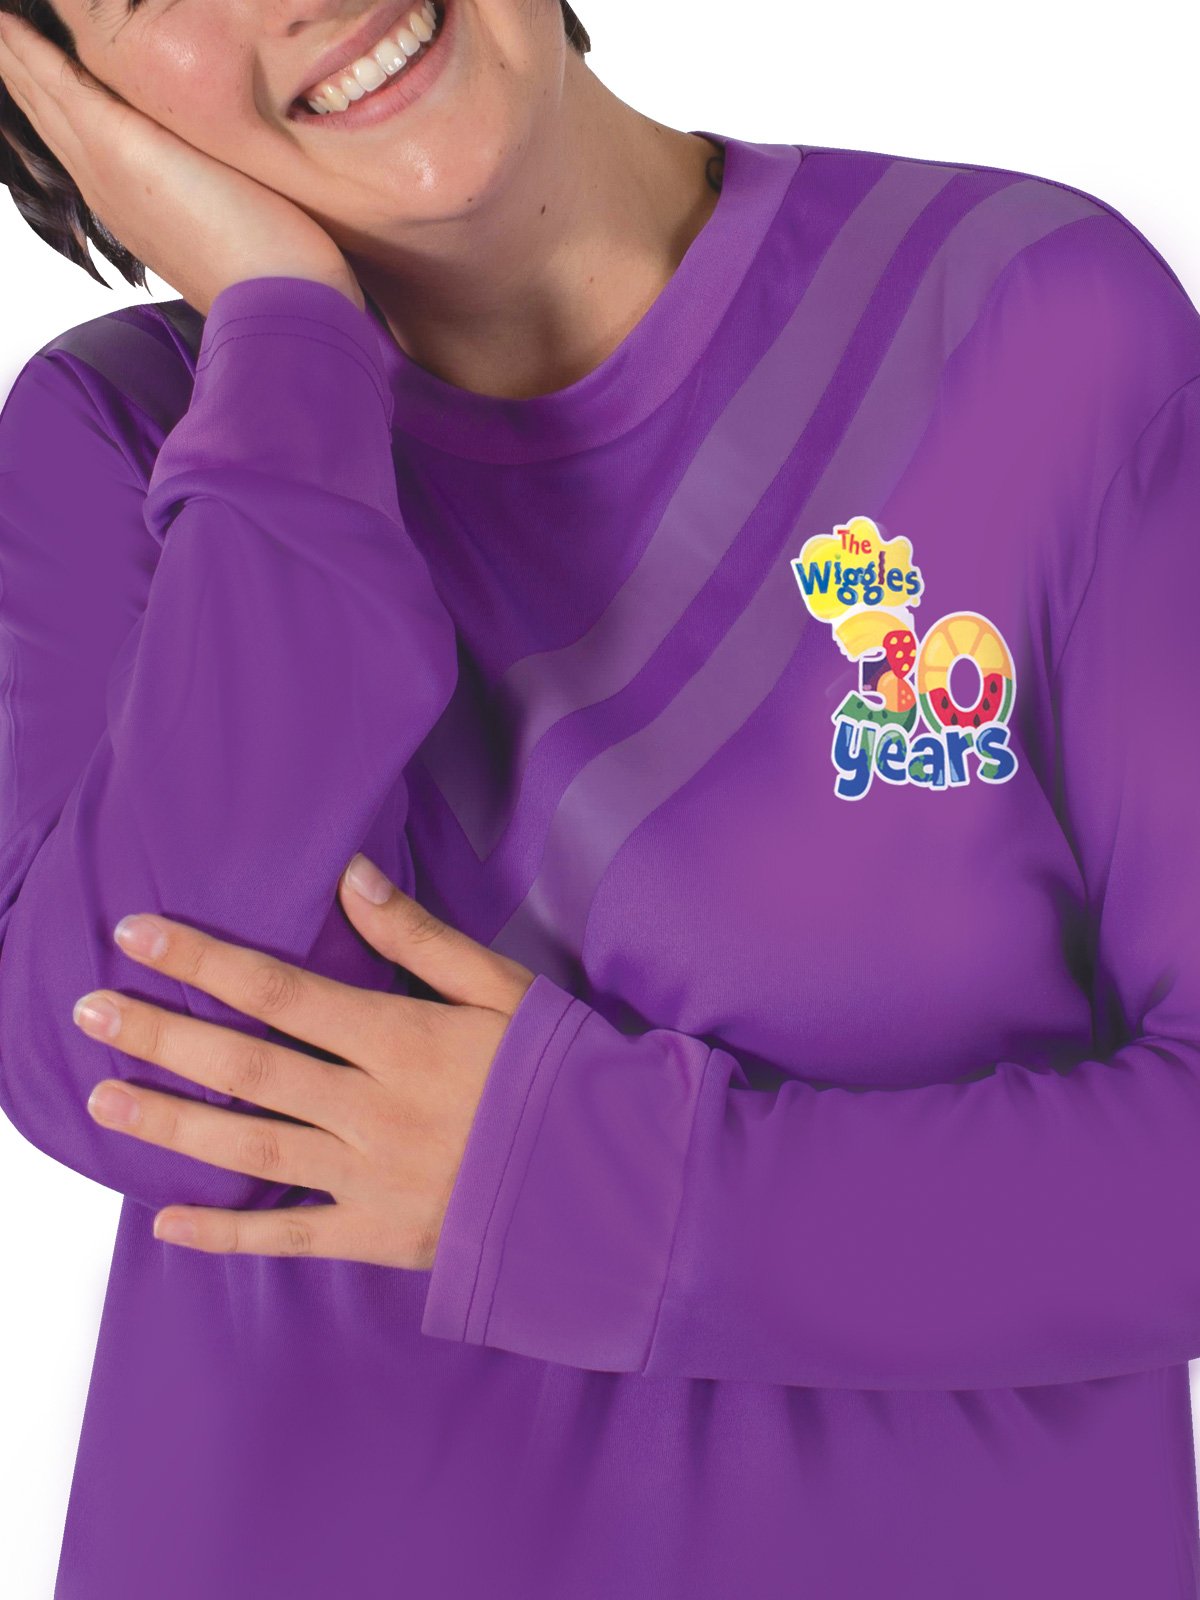 Costume Adult Lachy Wiggle Deluxe Purple Top Xlarge